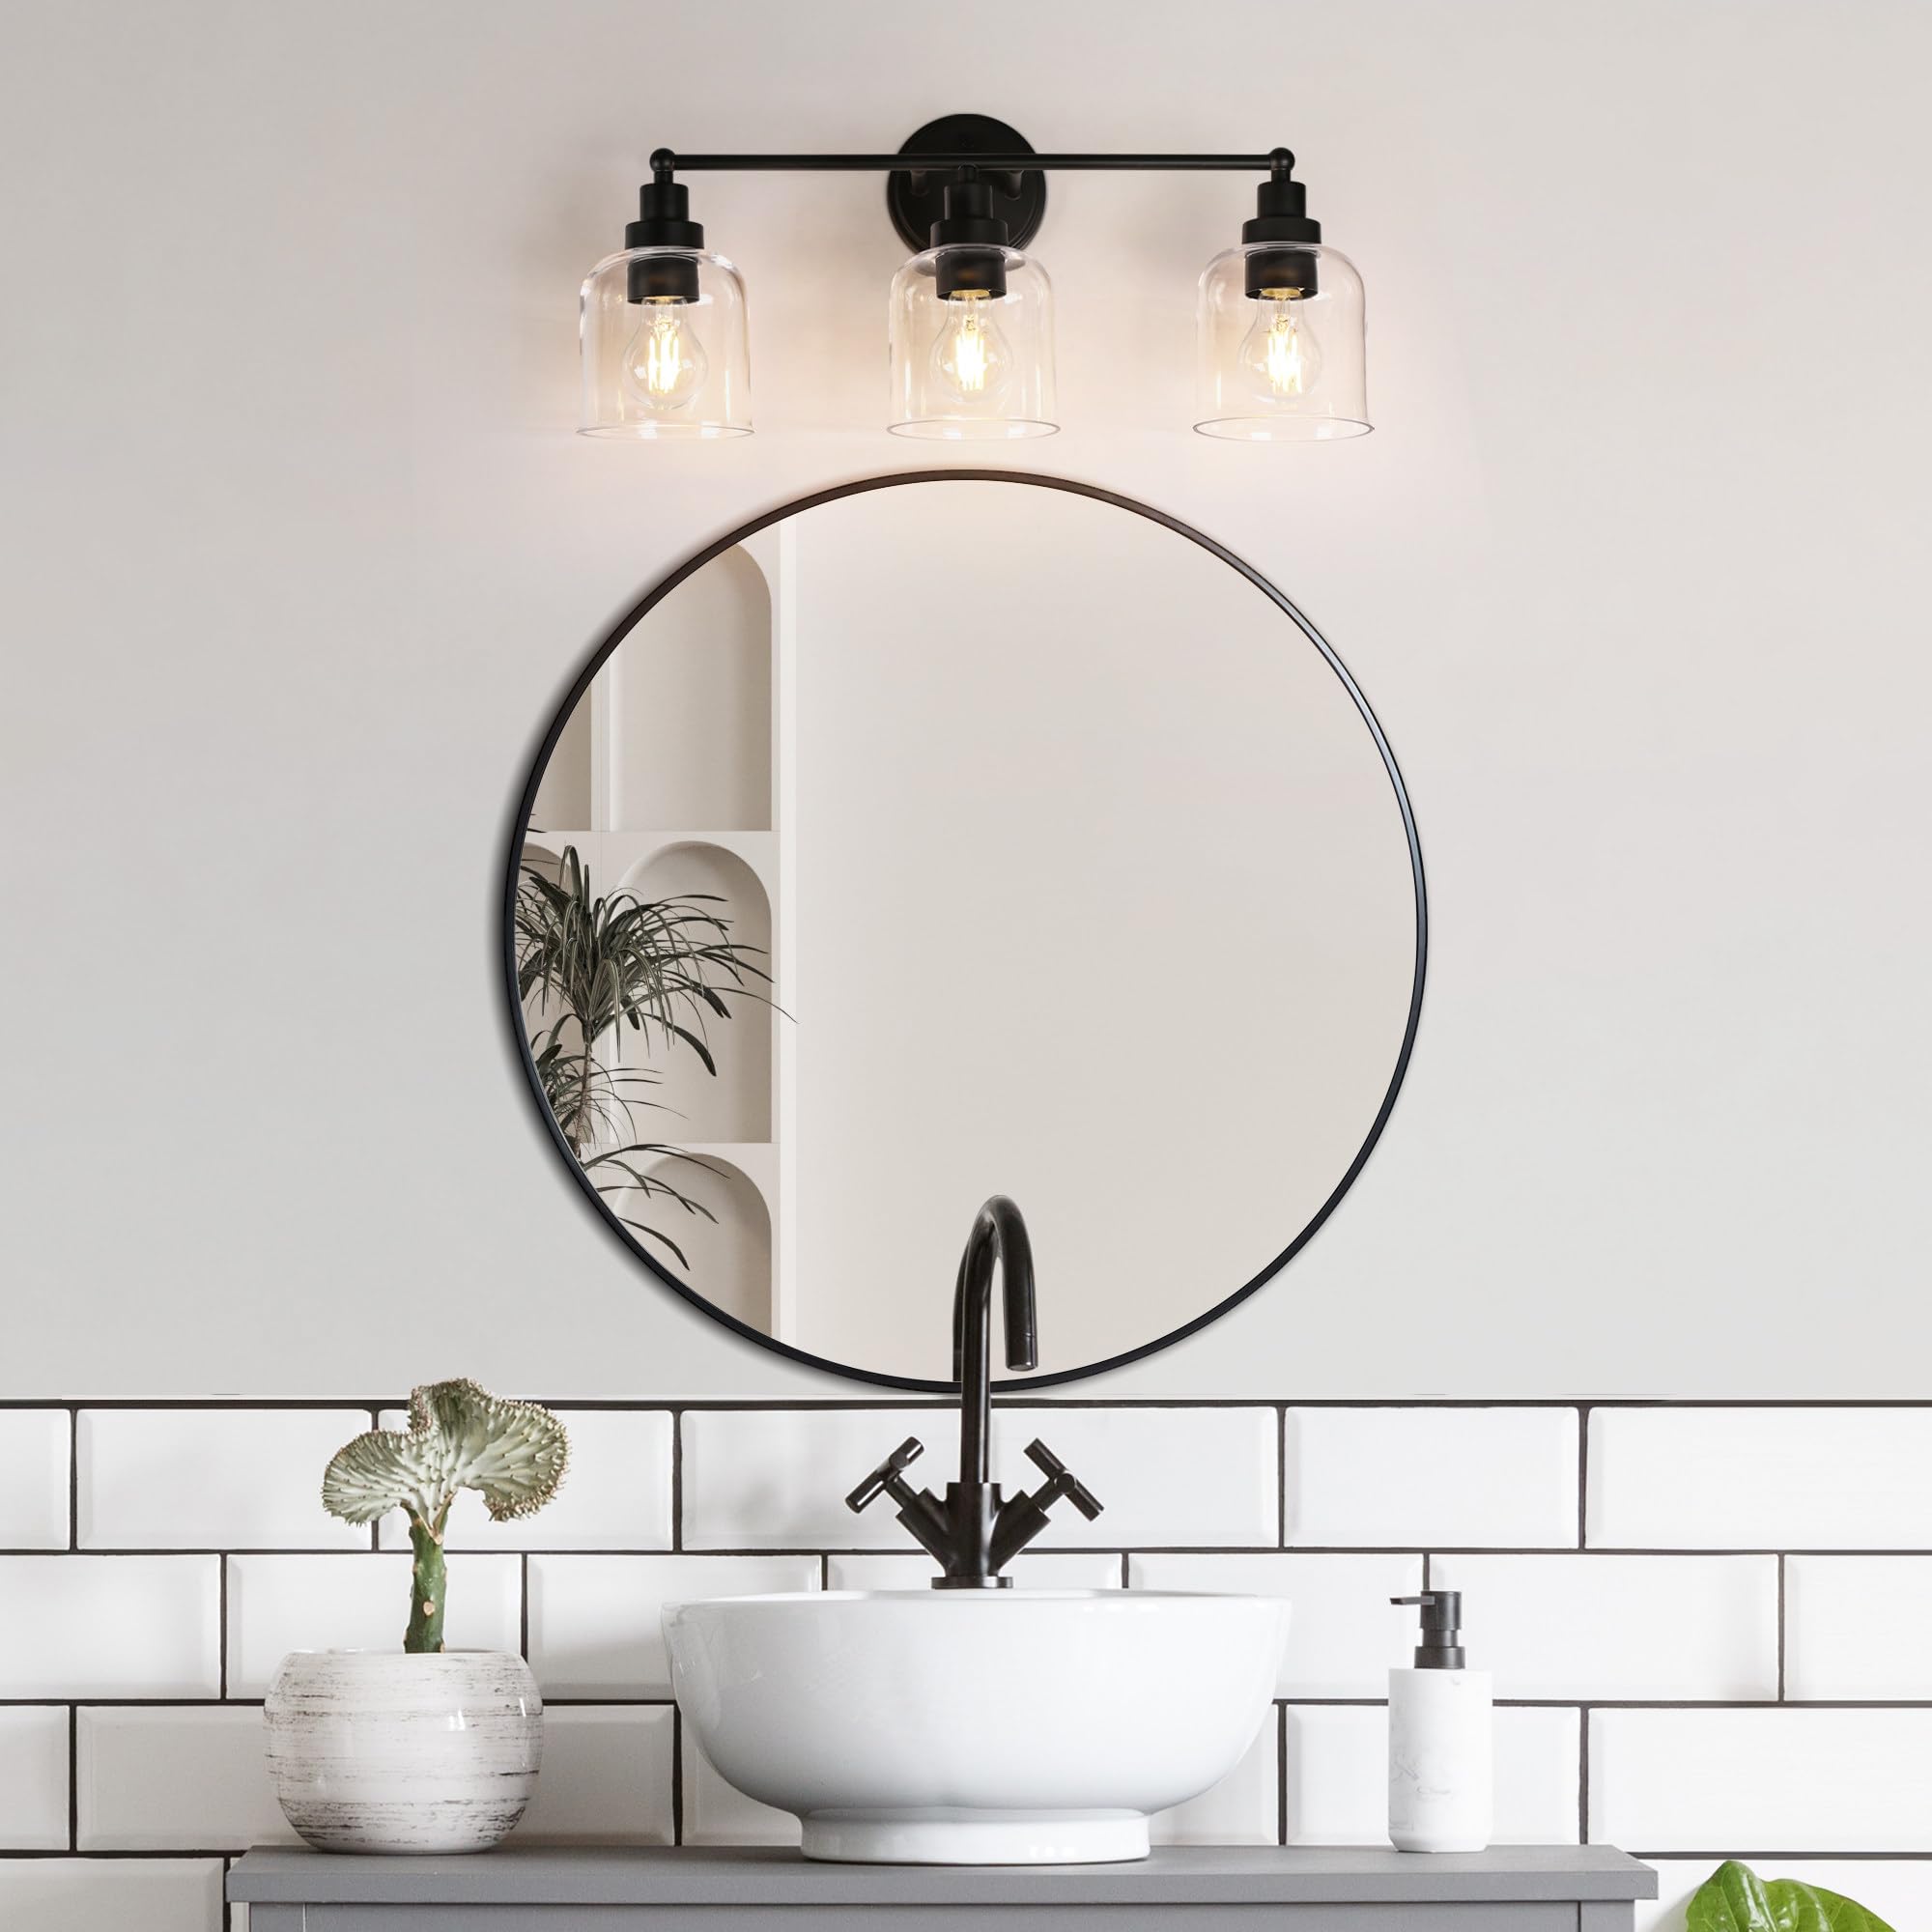 GEPOW Bathroom Wall Light Fixtures, 3-Light Black Vanity Light with Clear Glass Shade, Modern Farmhouse Wall Lamp Over Mirror for Hallway, Kitchen, Bedroom and Living Room